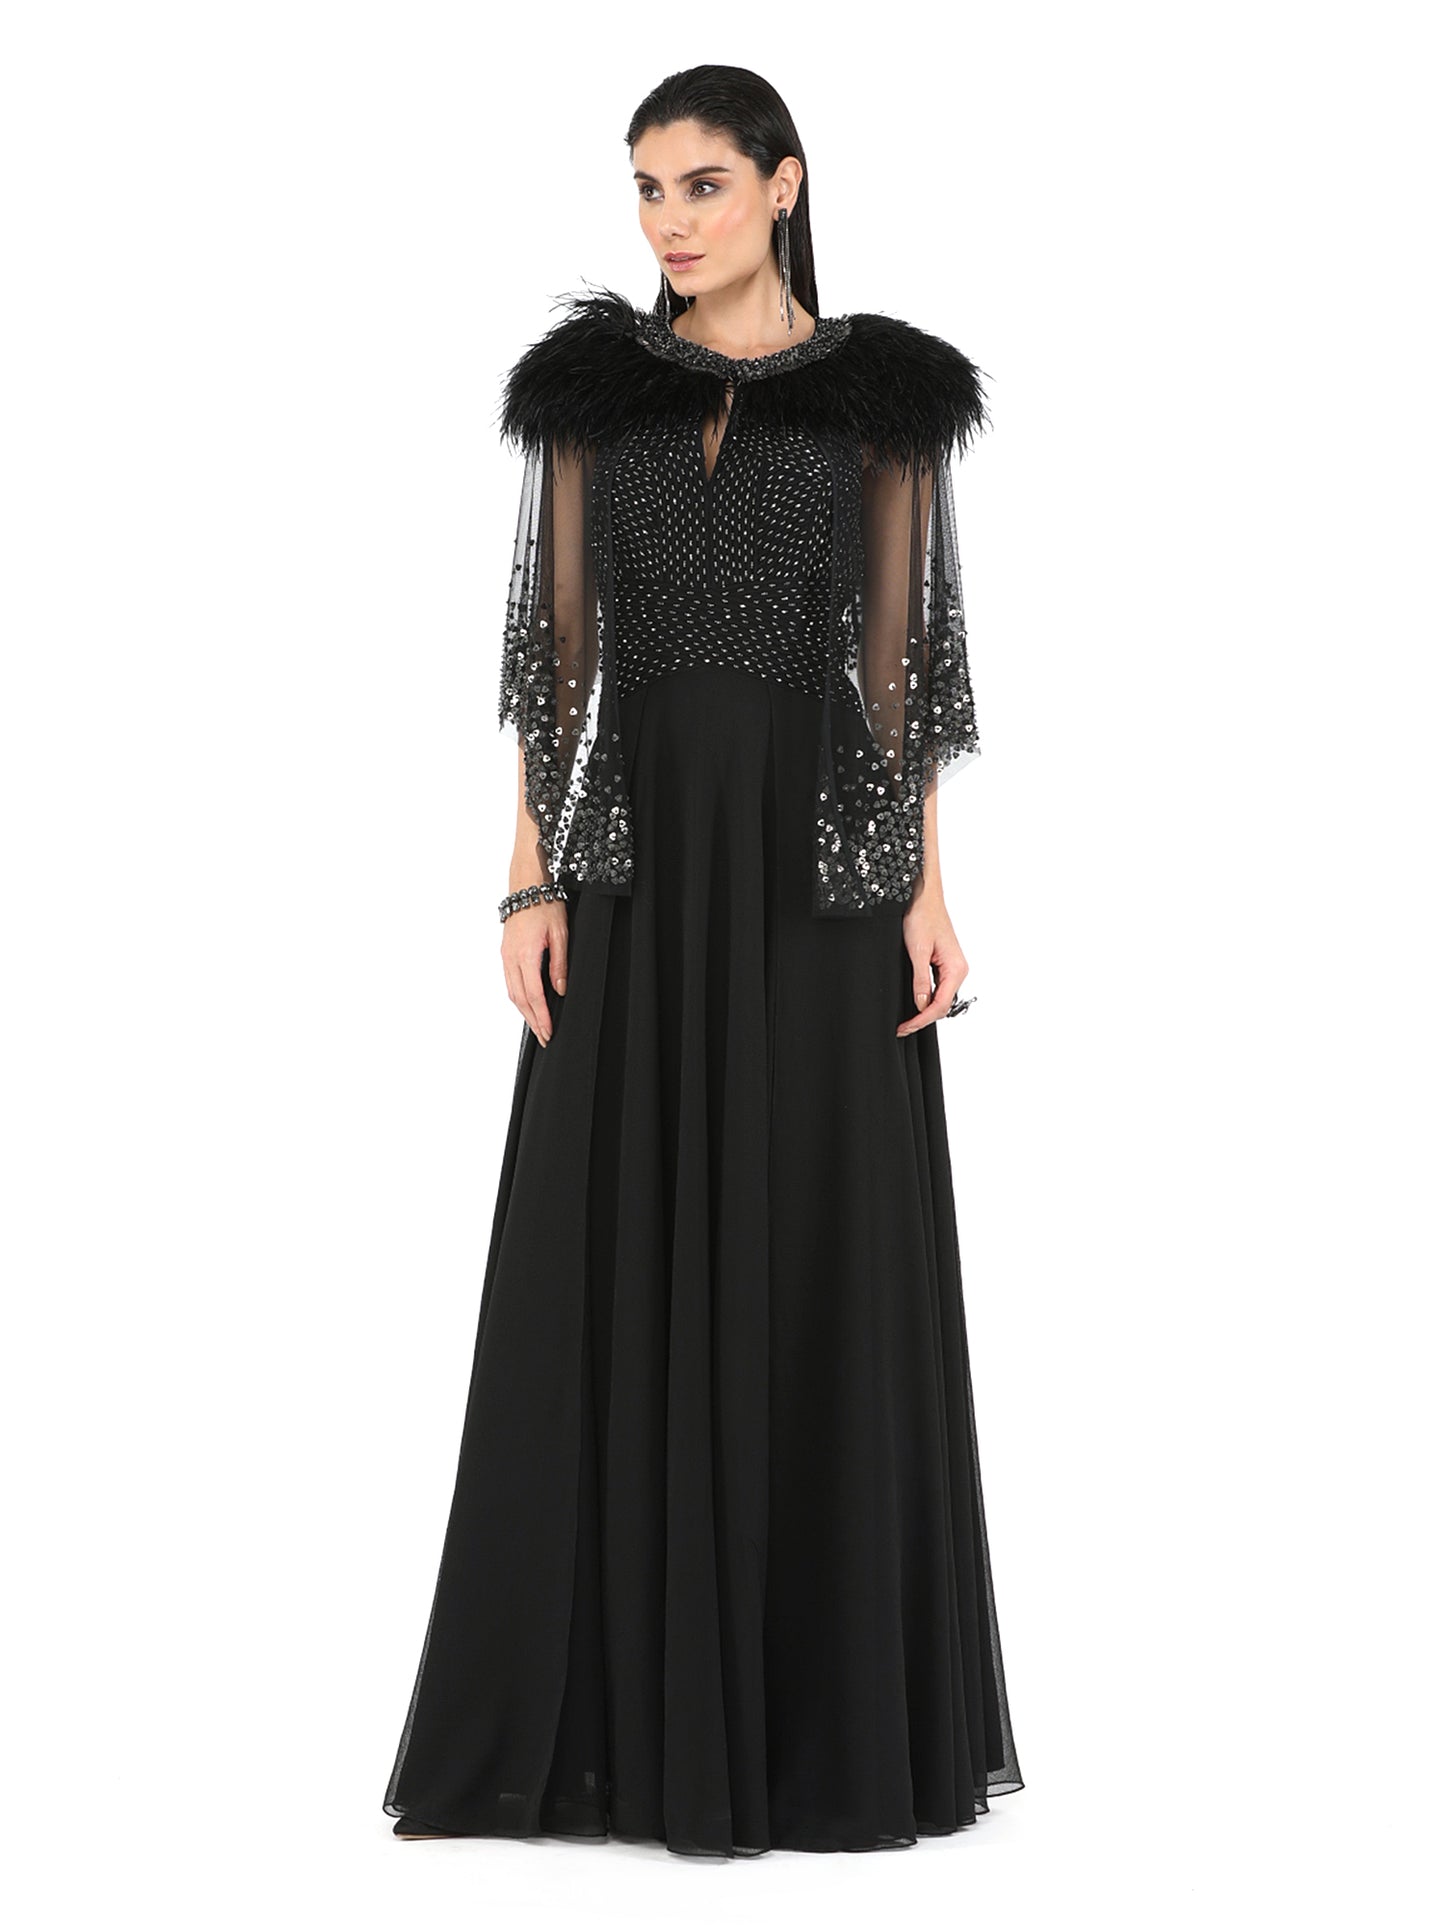 Ace Corded Gown With Cape